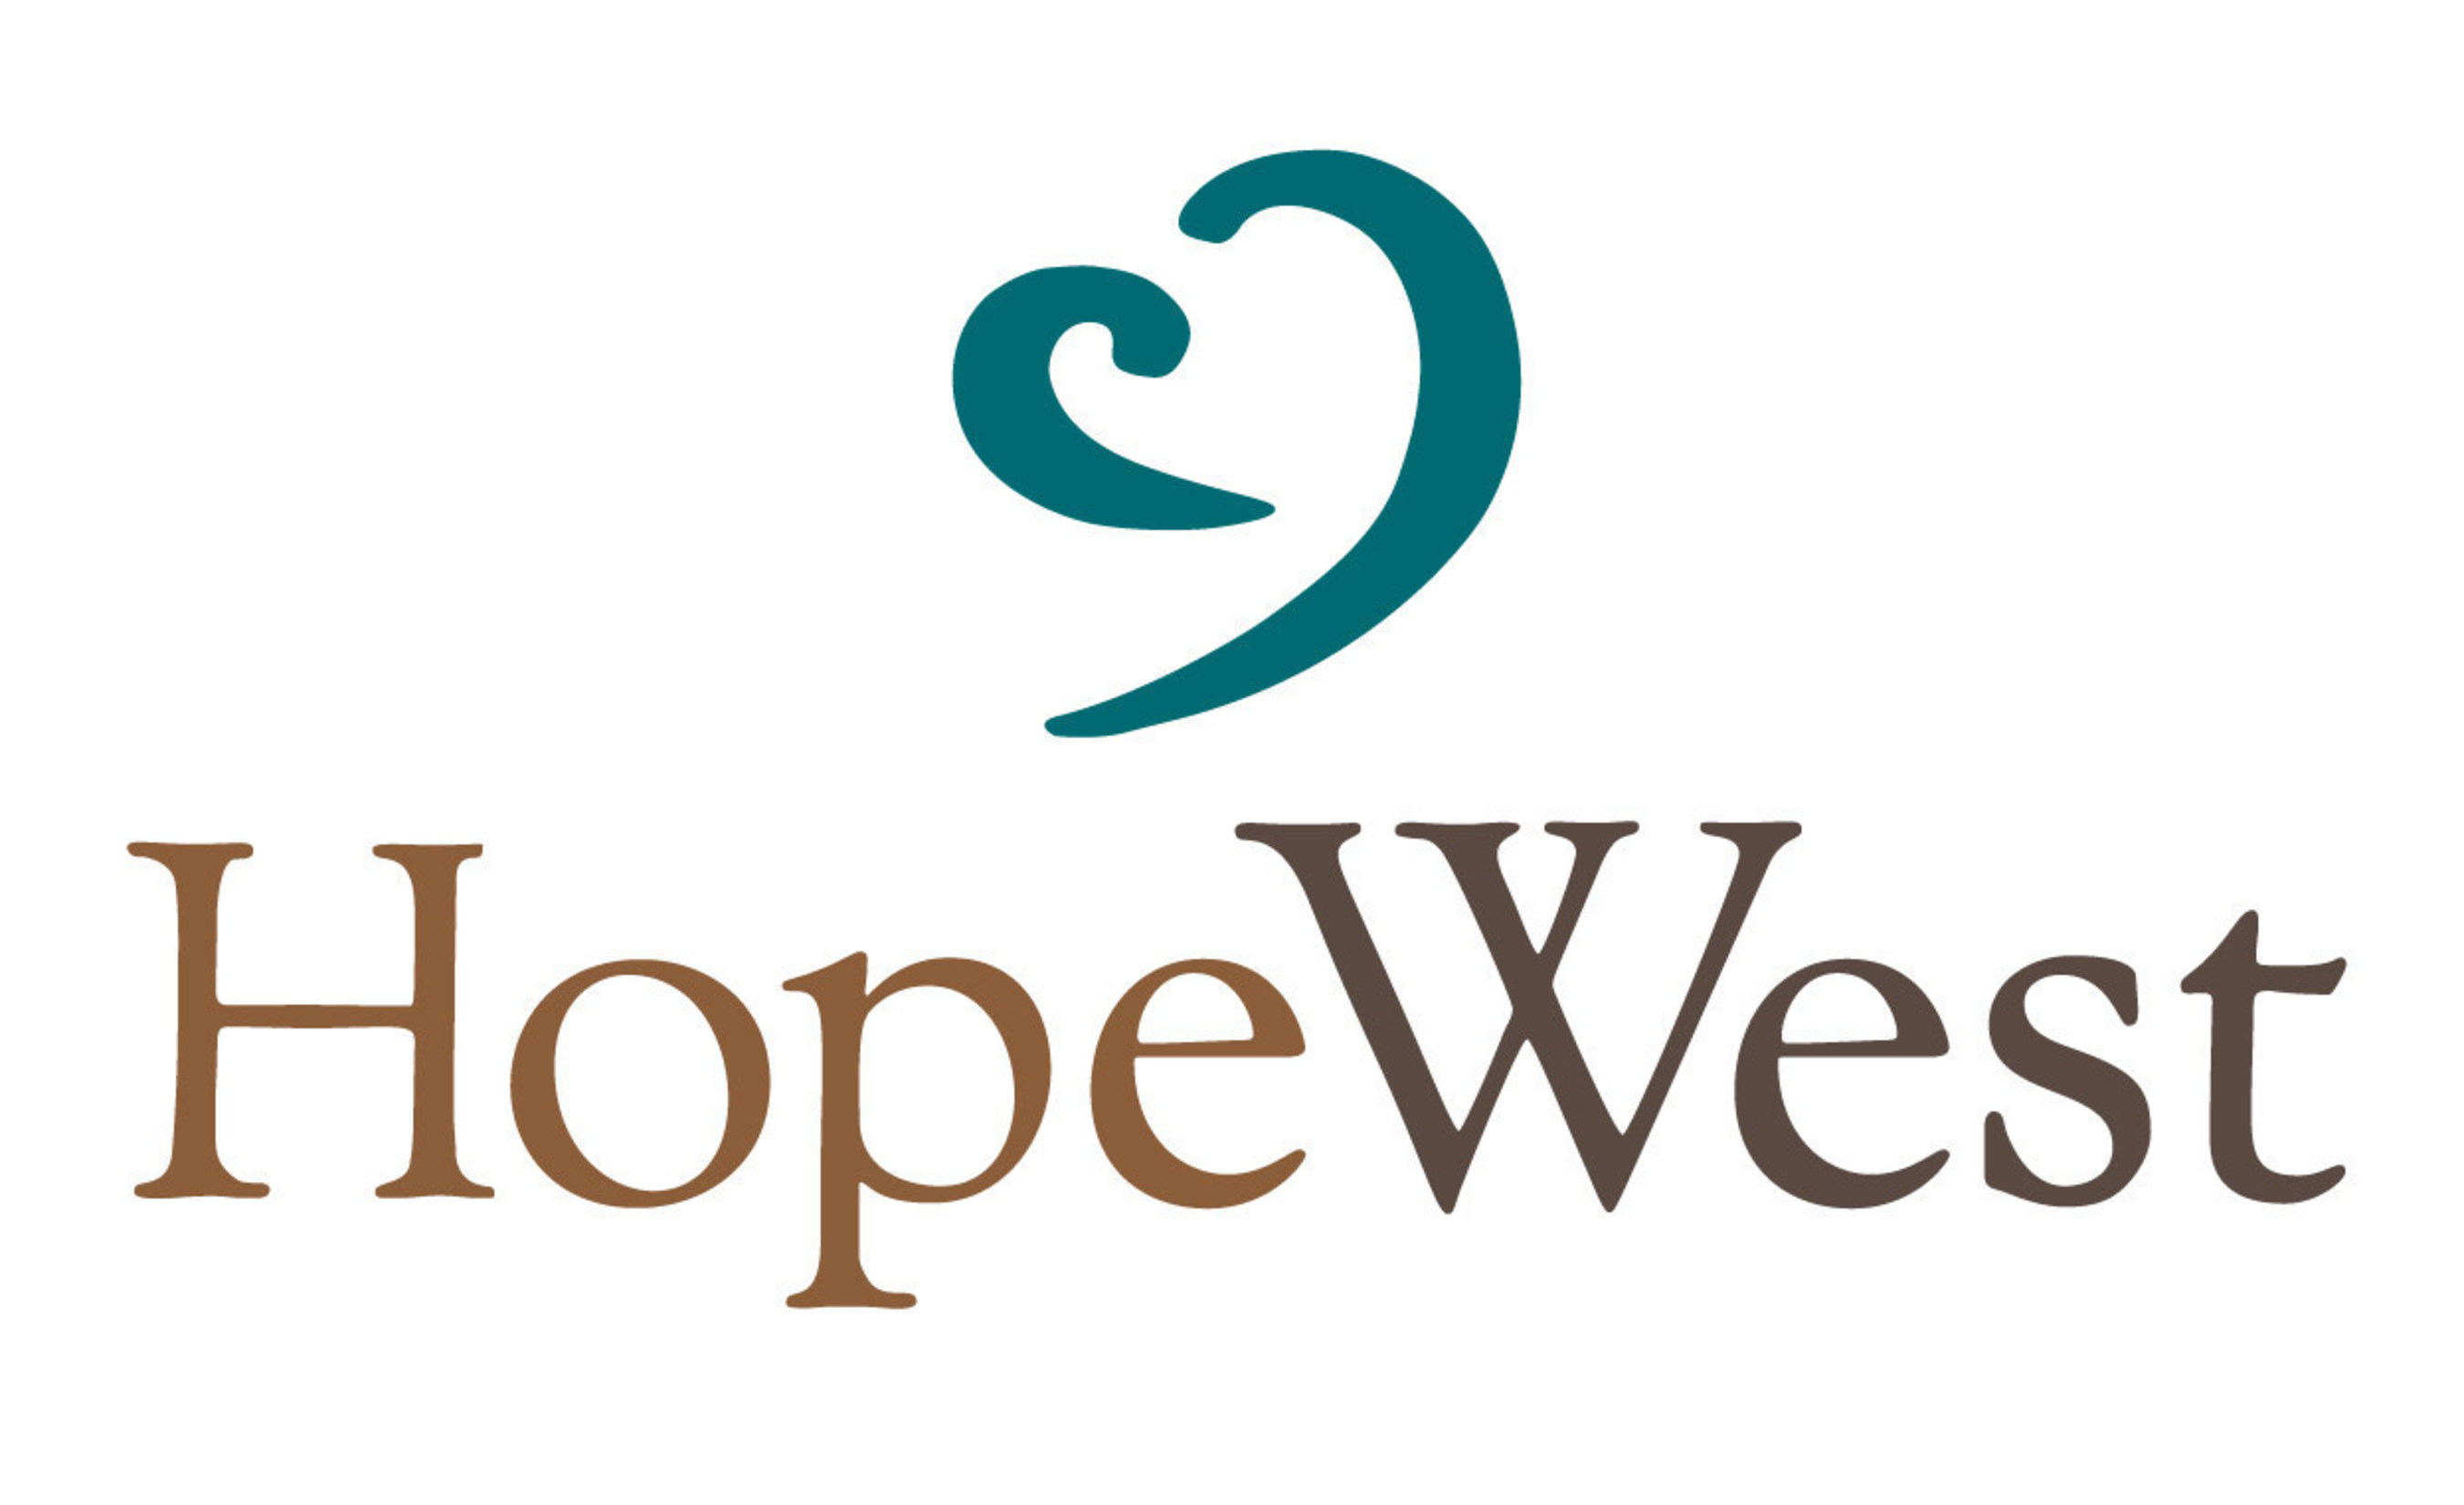 HopeWest is a non-profit hospice, palliative care and grief support organization dedicated to profoundly change the way the community experiences serious illness and grief - one family at a time. Founded in 1993 through a community-wide vision, HopeWest now serves more than 4,000 individuals each year across 7,000 square miles of western Colorado in Mesa, Delta, Montrose, Ouray and Rio Blanco Counties. For more information about HopeWest call 970-241-2212 or visit HopeWestCO.org.